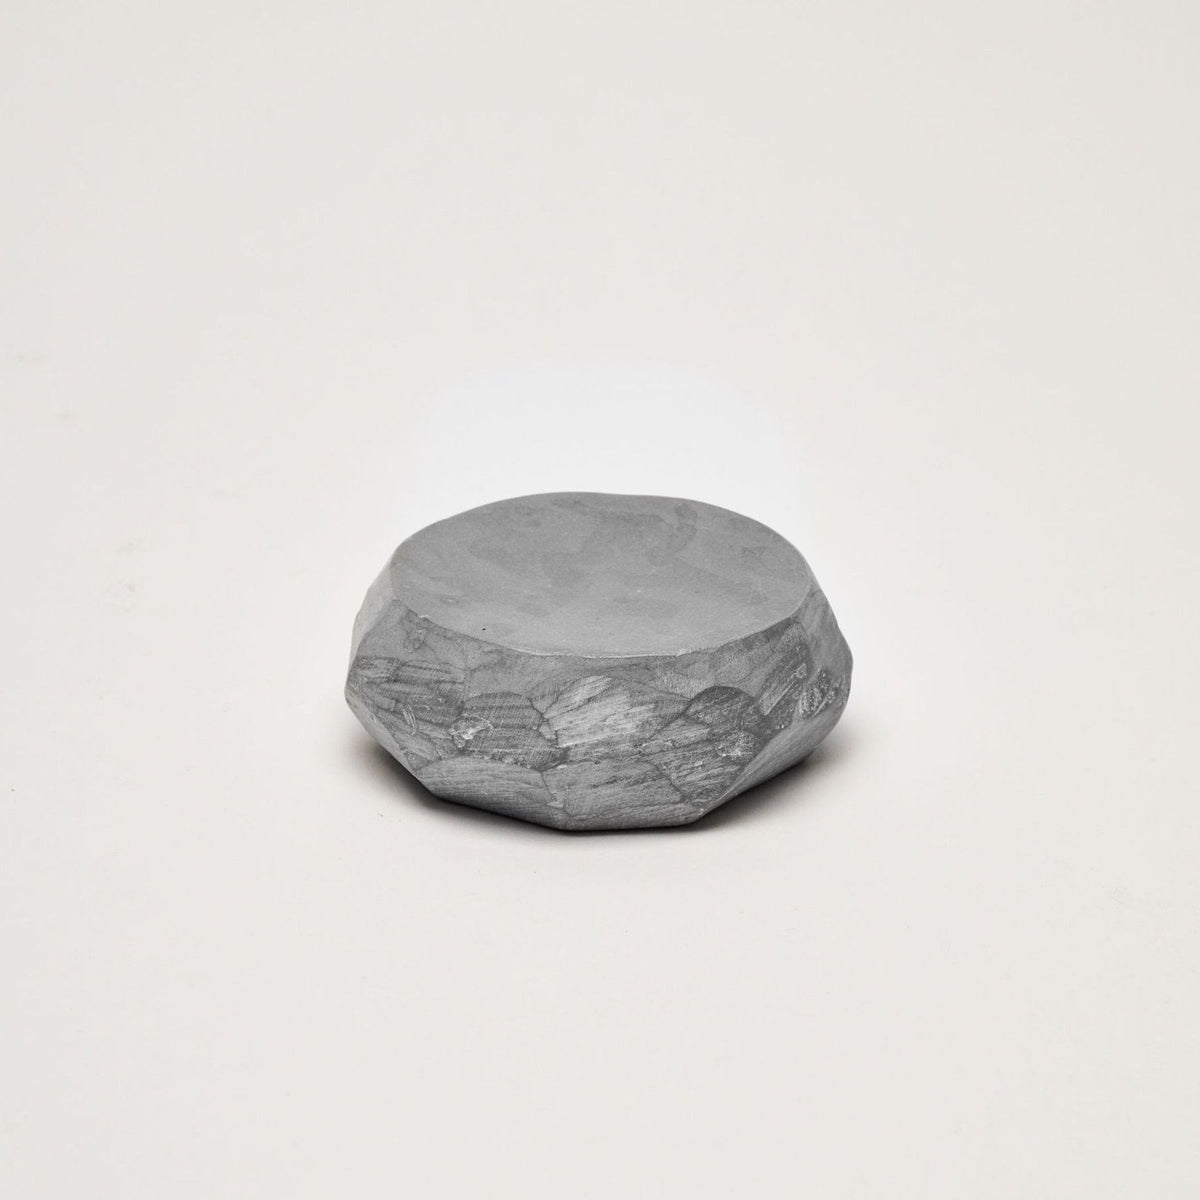 A small round piece of Asili&#39;s Textured Dish Set - Grey sitting on a white surface.